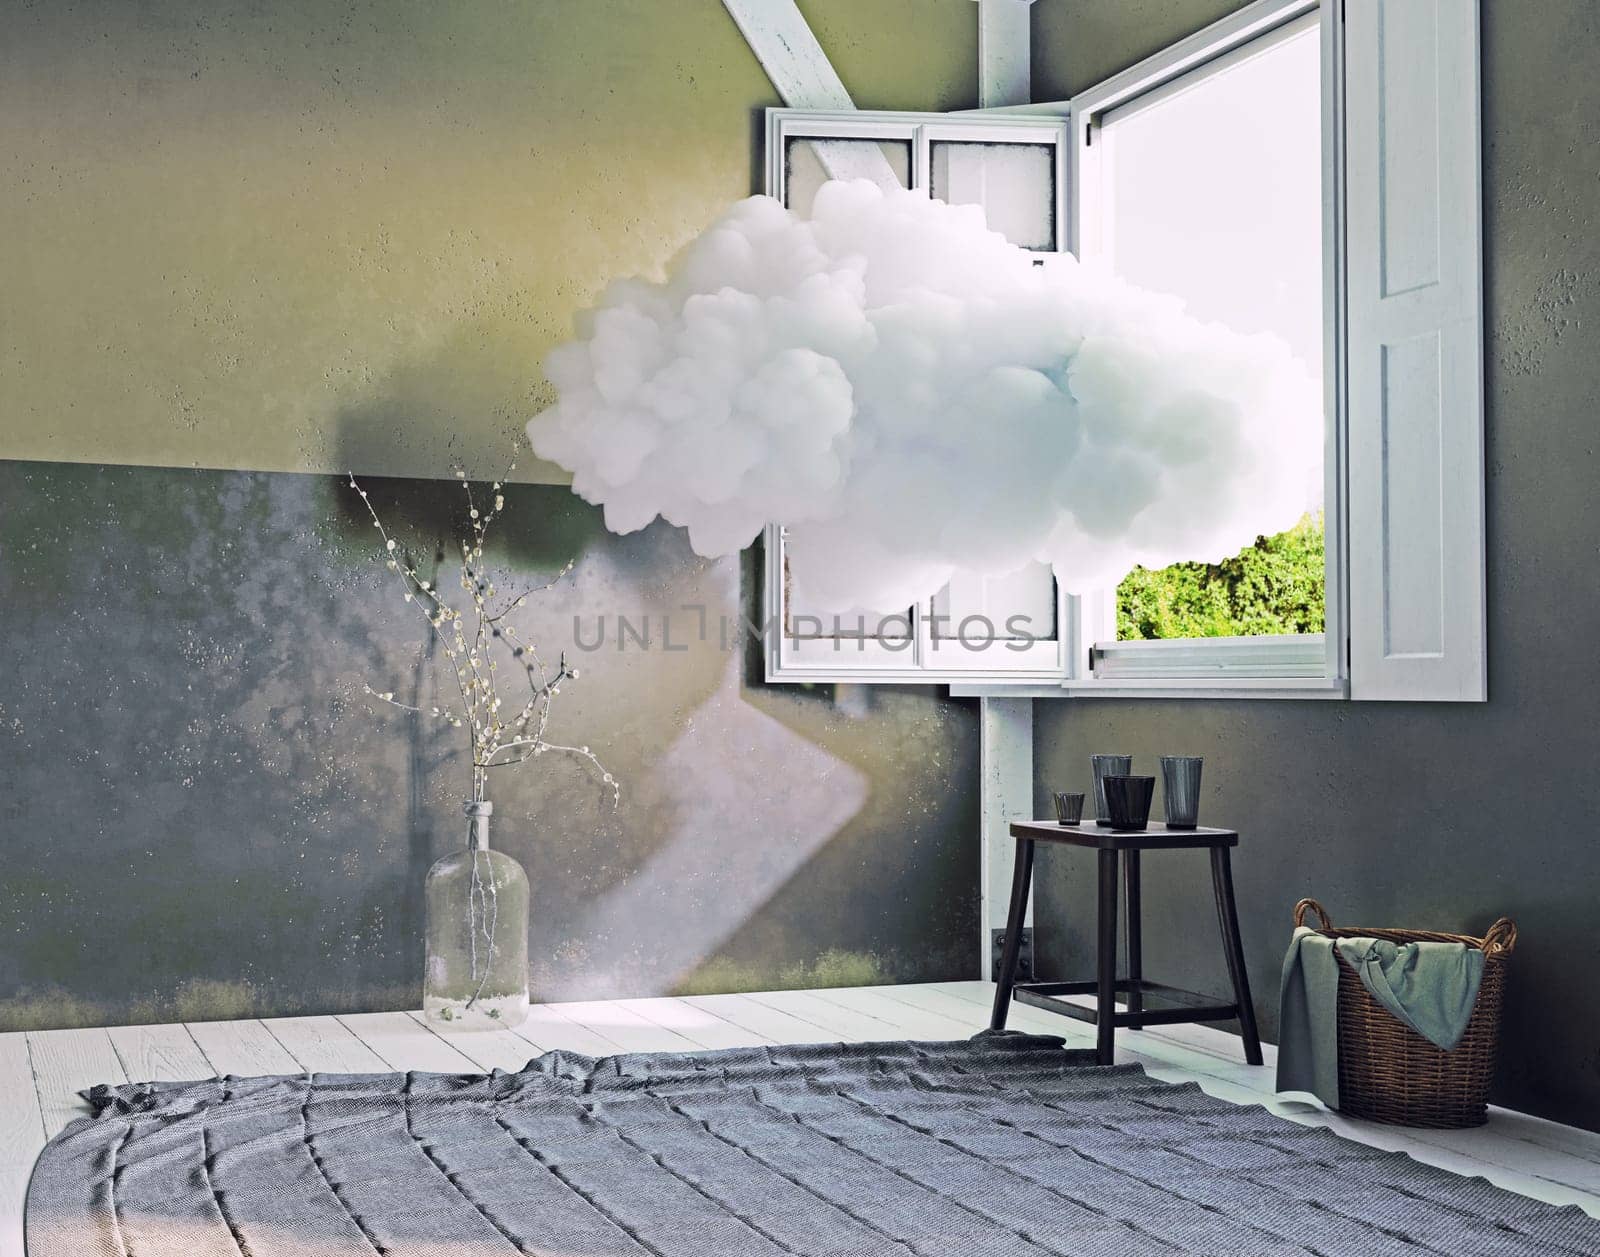 cloud in the room. 3d creative concept rendering